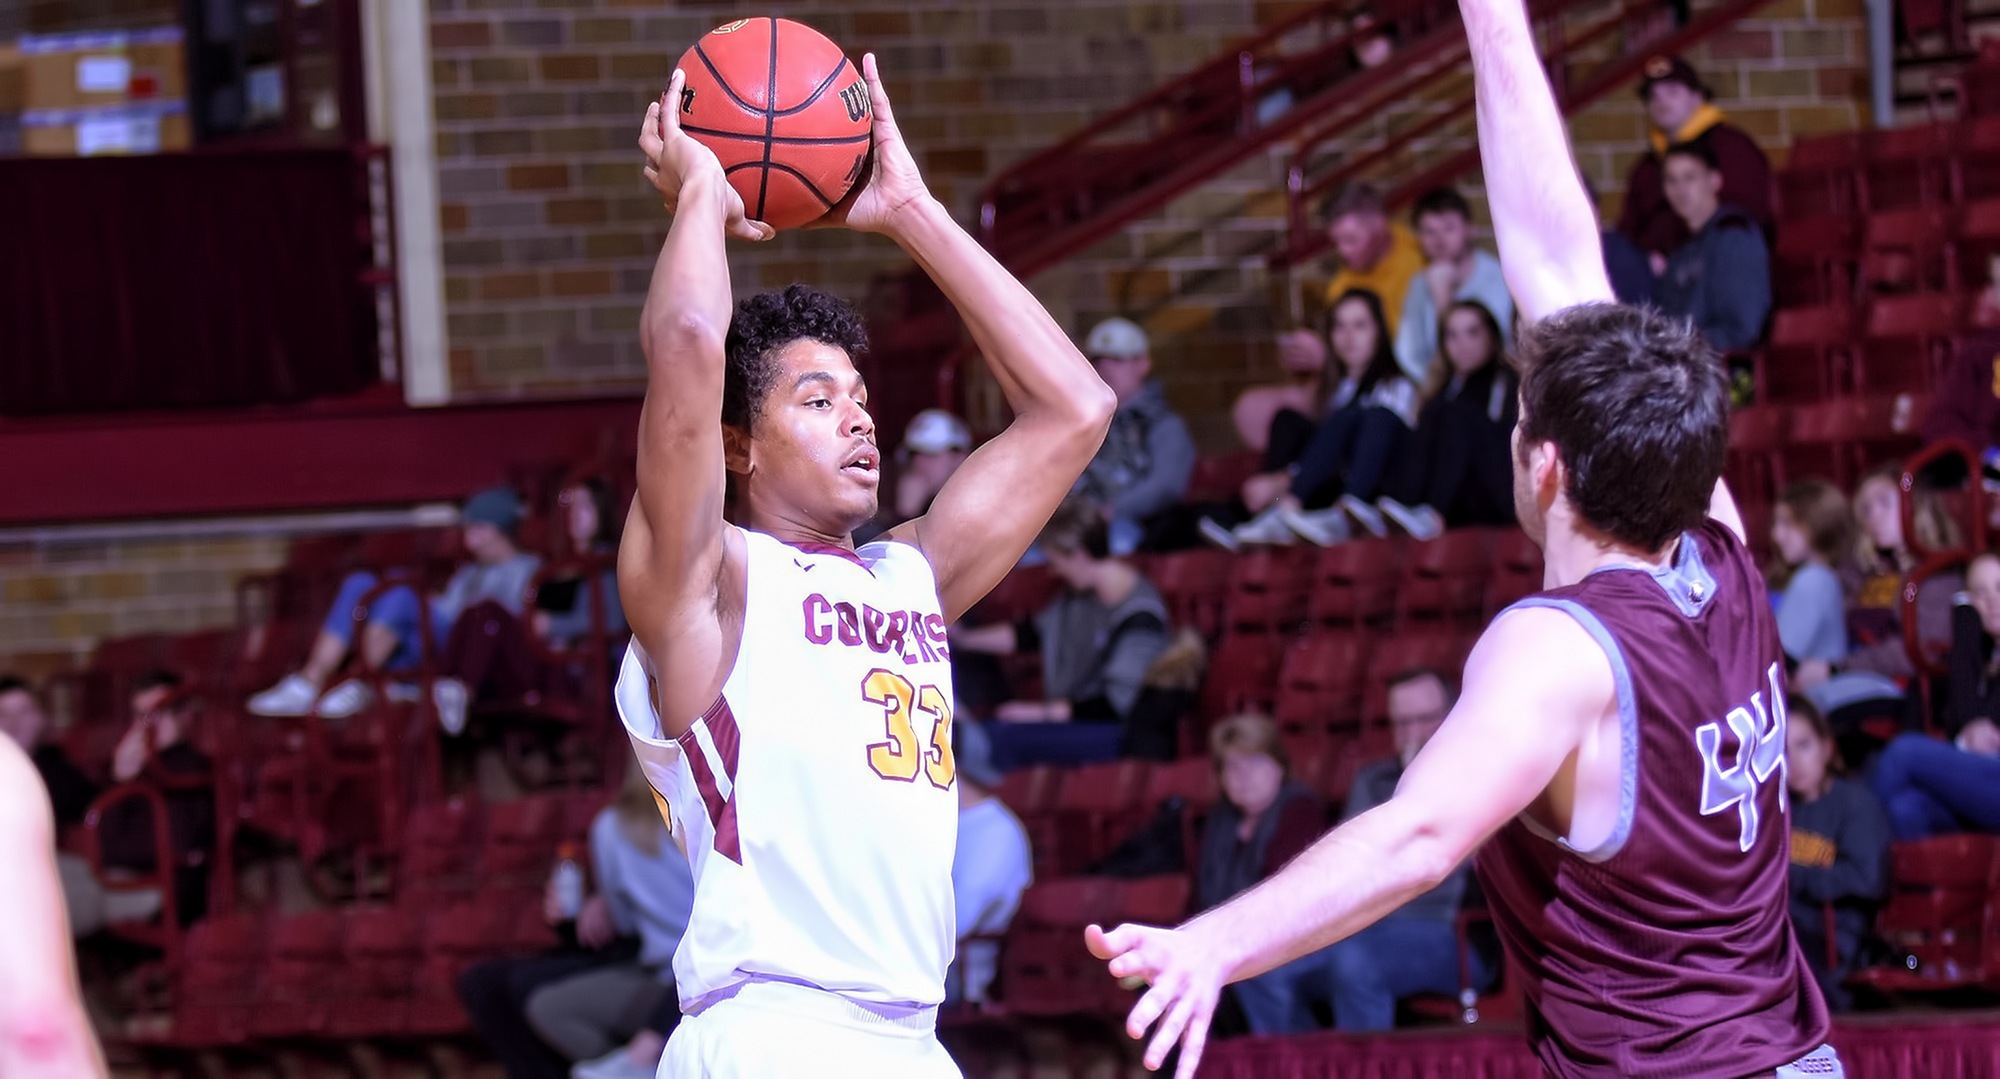 Junior Ty Setness put up career high numbers in points and rebounds in his first collegiate start in the Cobbers' game at Martin Luther.